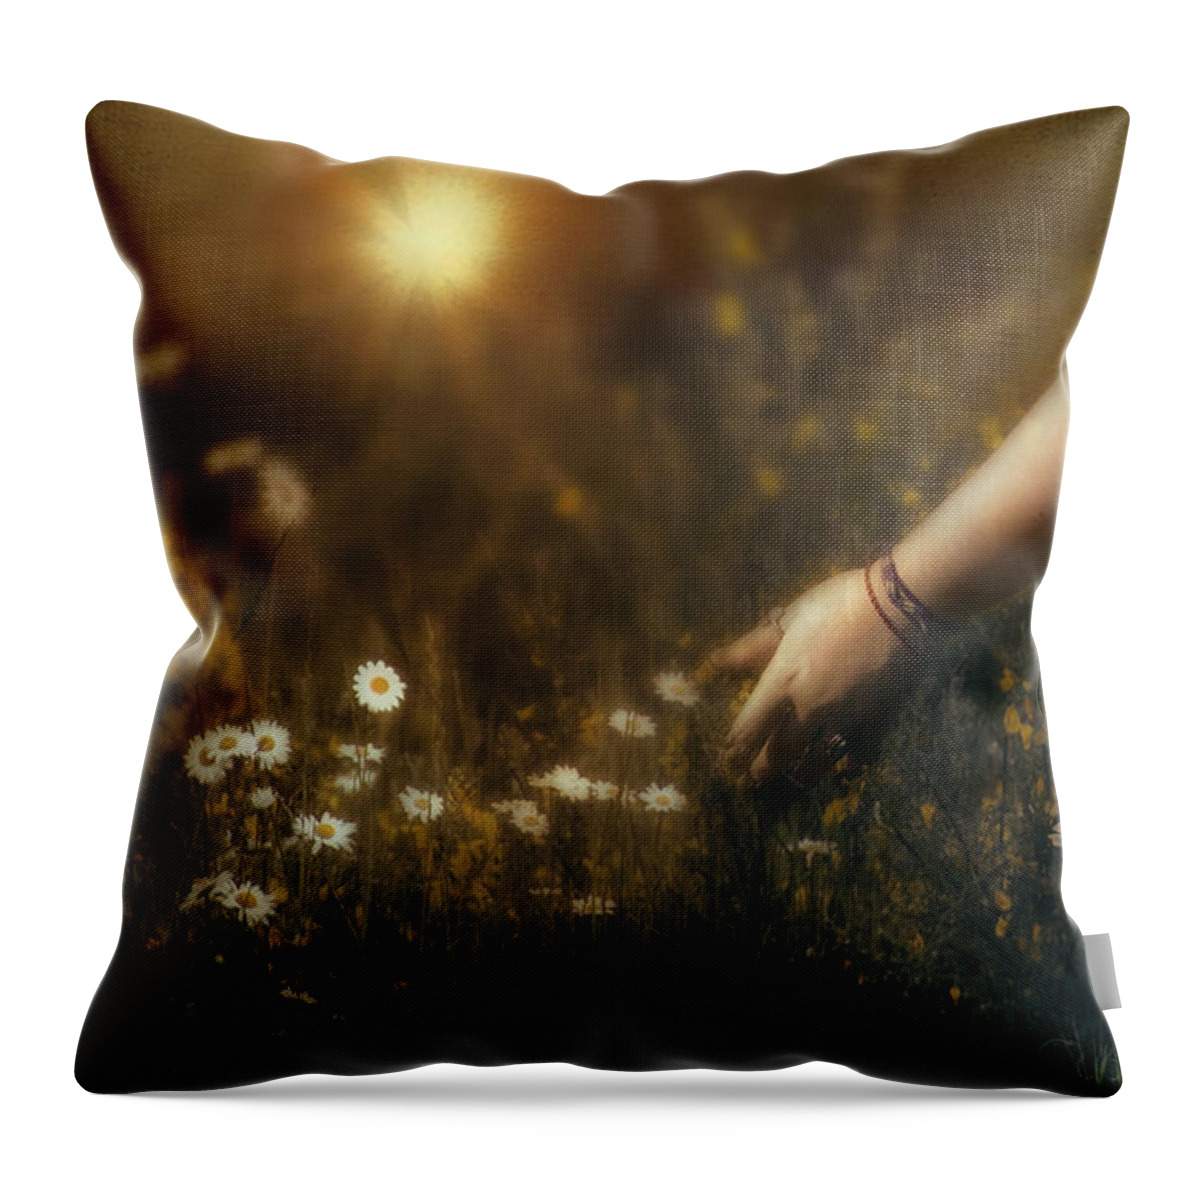  Throw Pillow featuring the photograph Dr. Chandra, will I dream by Cybele Moon